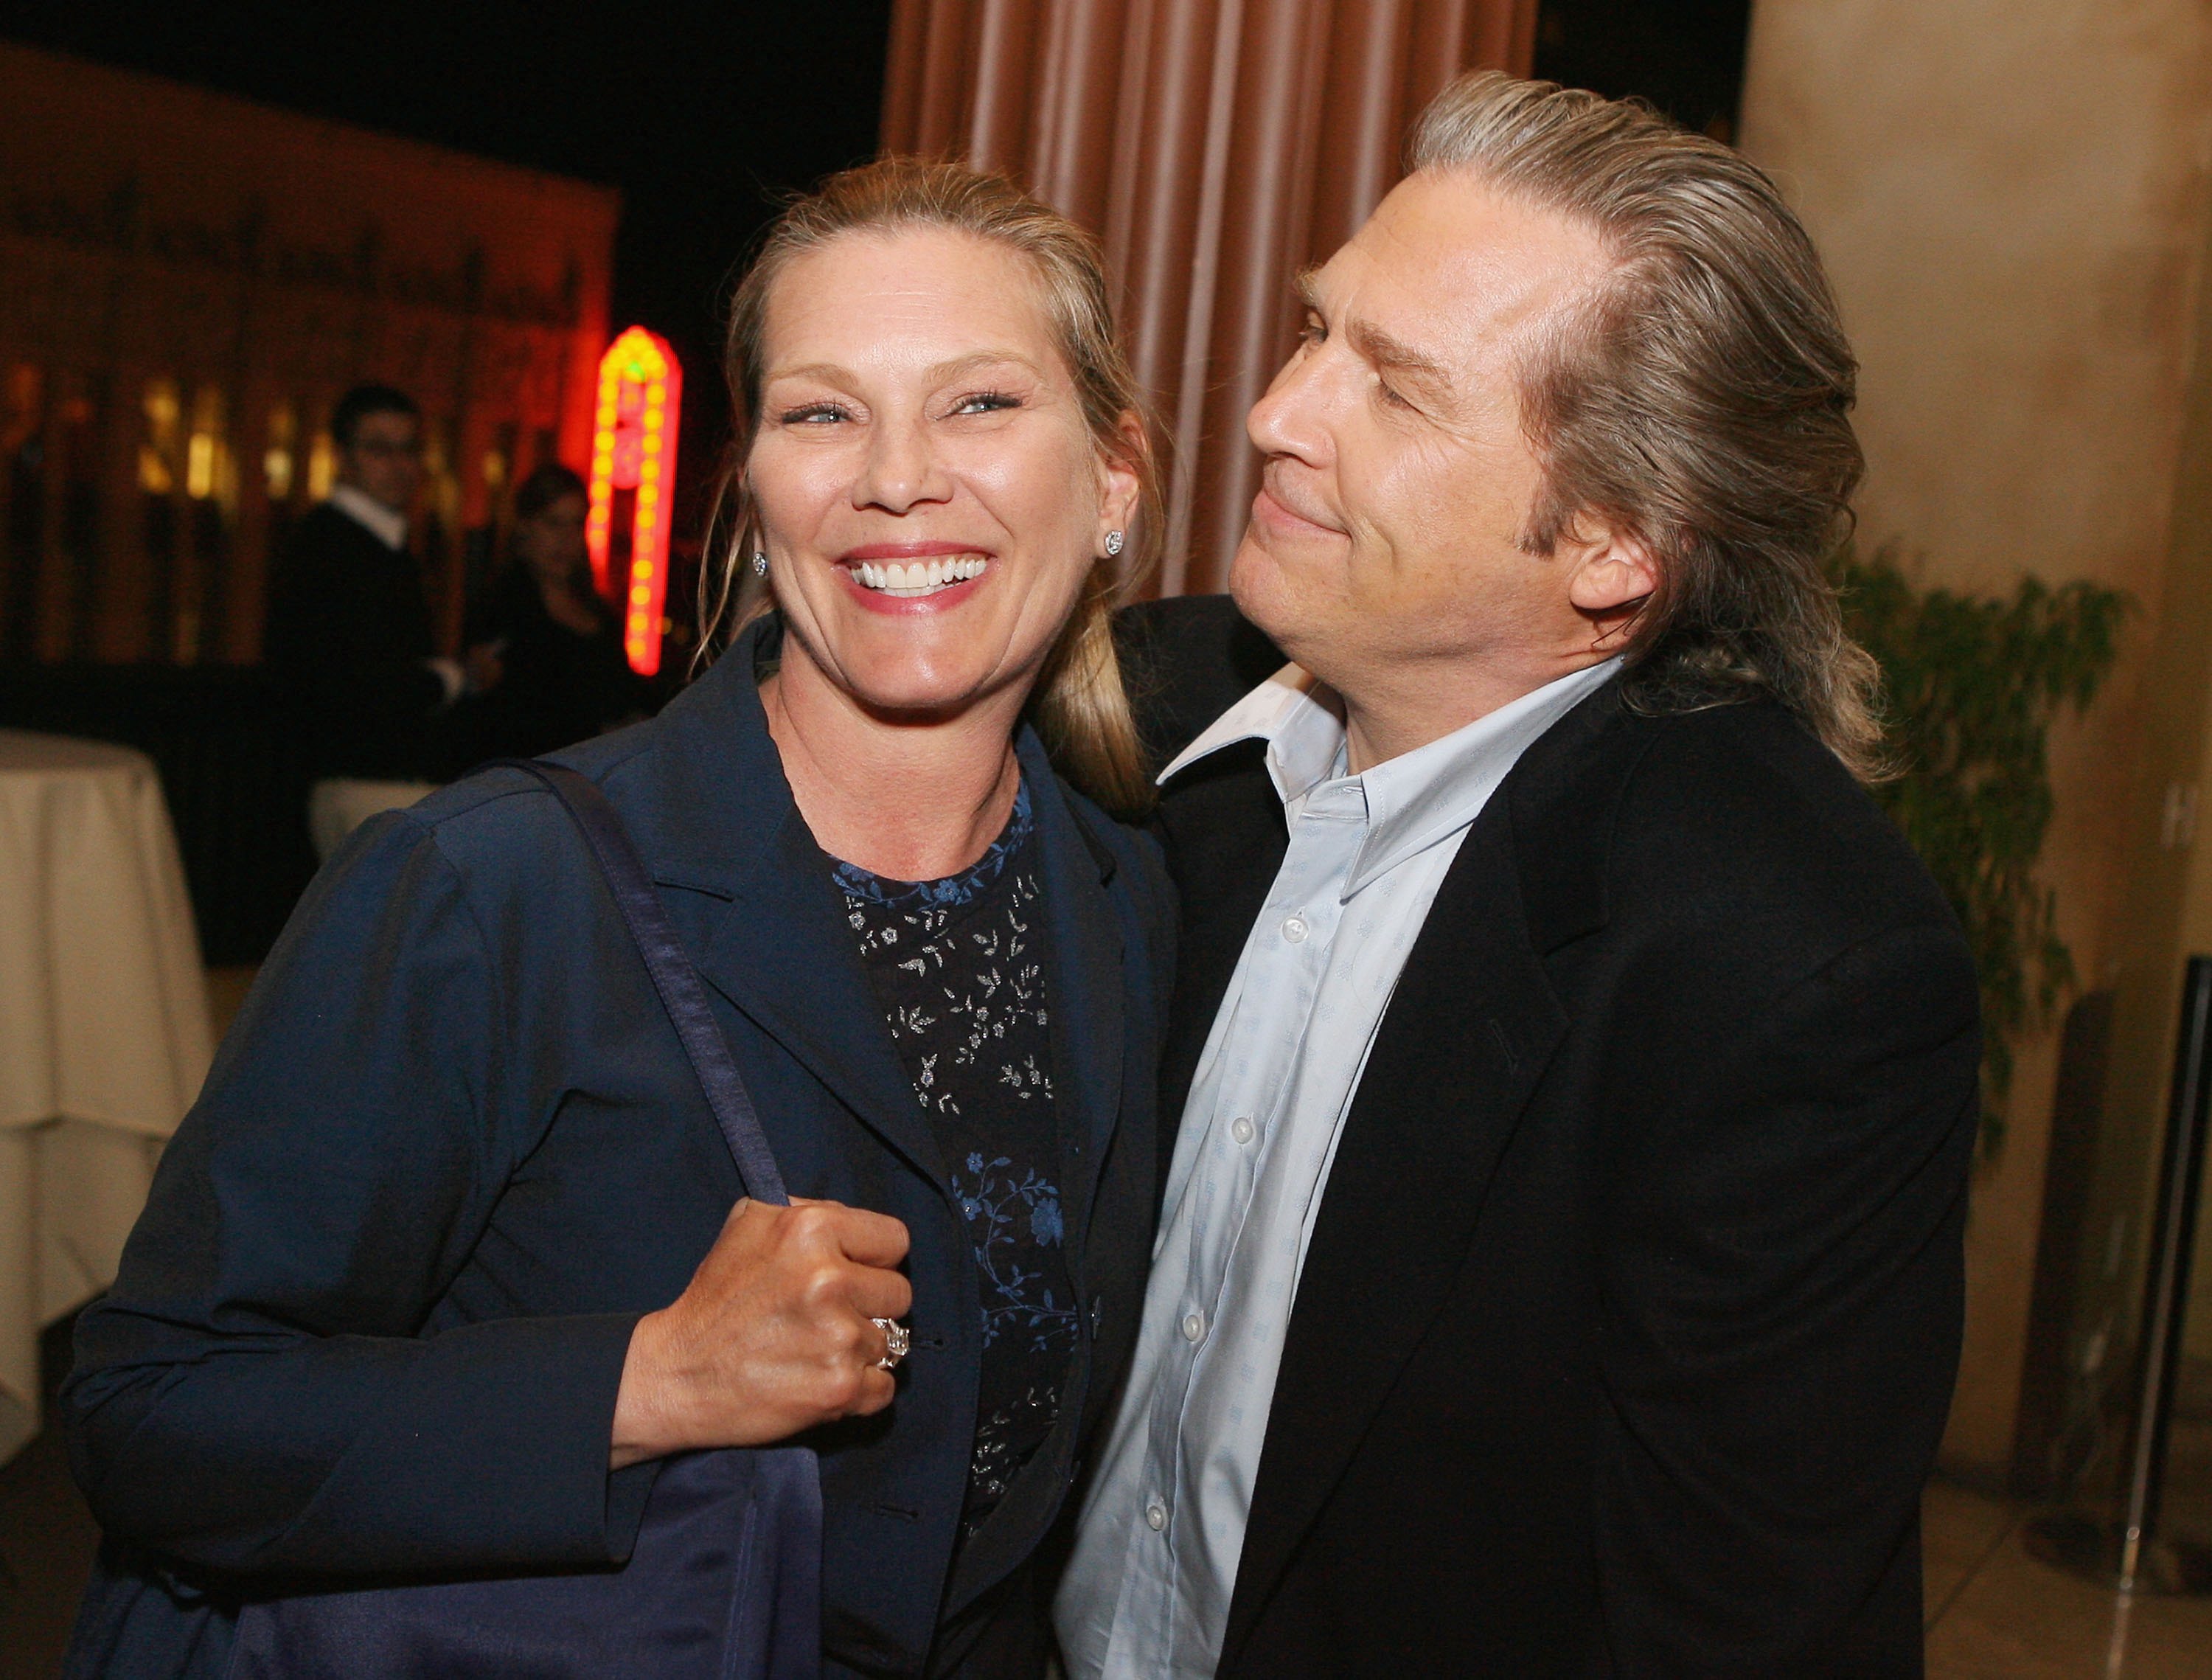 Jeff Bridges and his wife Susan pose at the afterparty for a special screening of Touchstone's "Stick It" at Loggia on April 17, 2006 in Los Angeles, California | Source: Getty Images